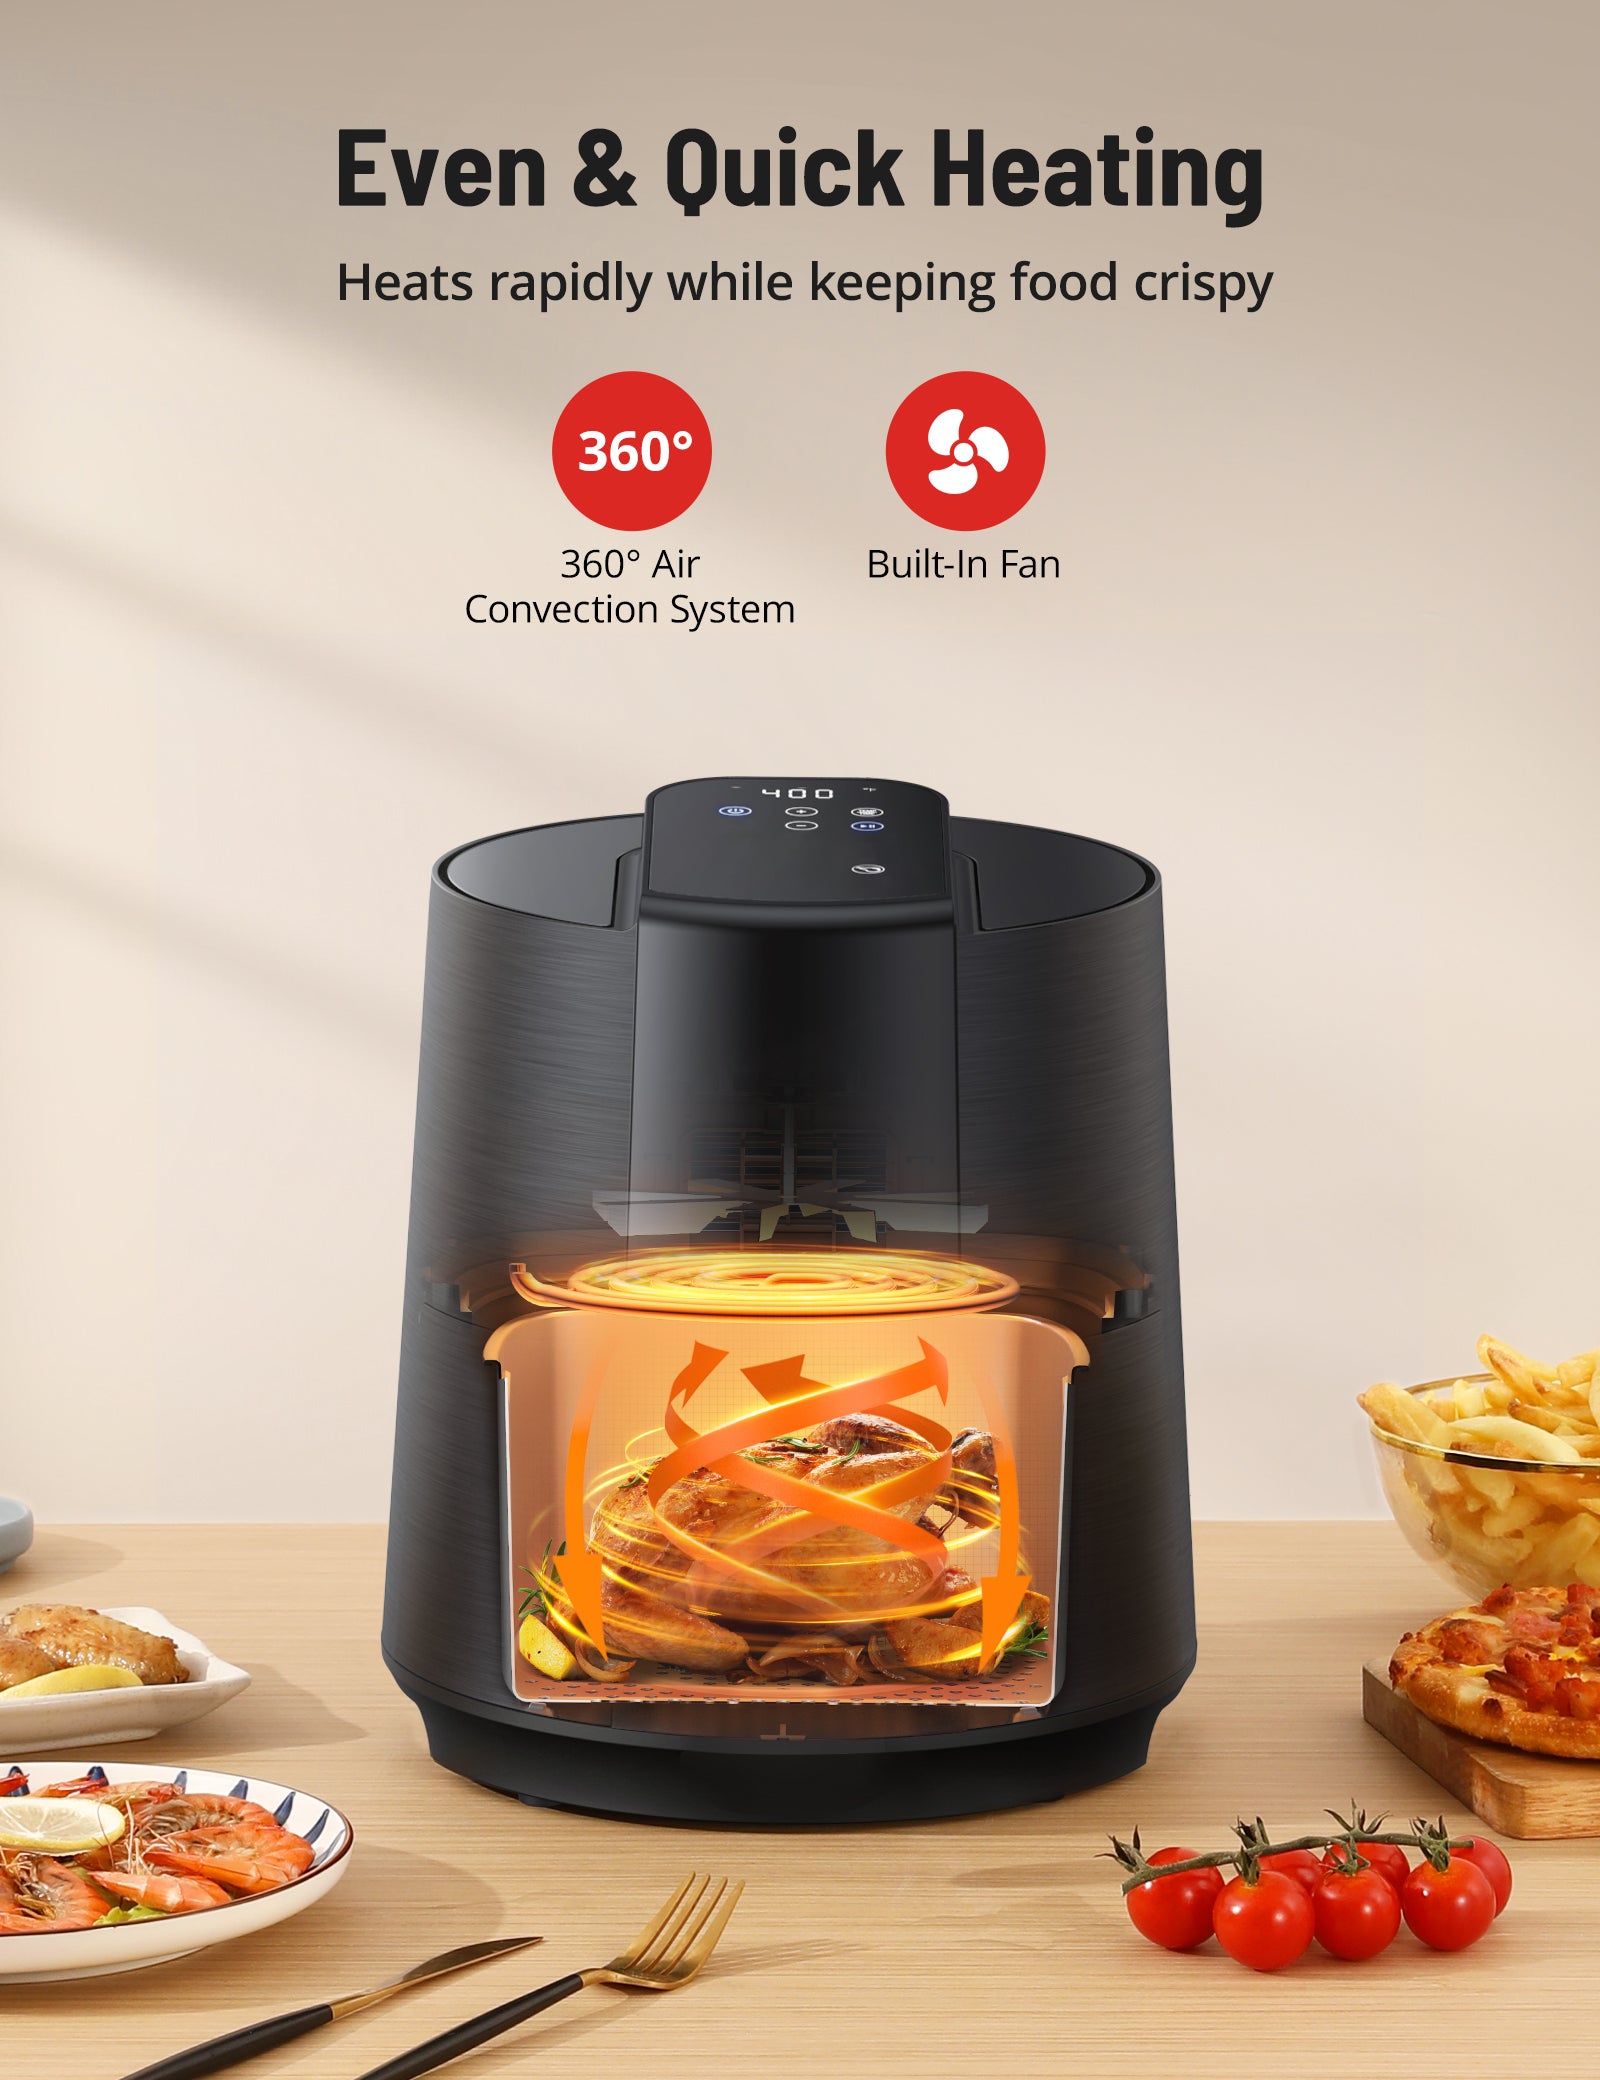 I Made Dinner in 5 Minutes With the Powerful TaoTronics Air Fryer